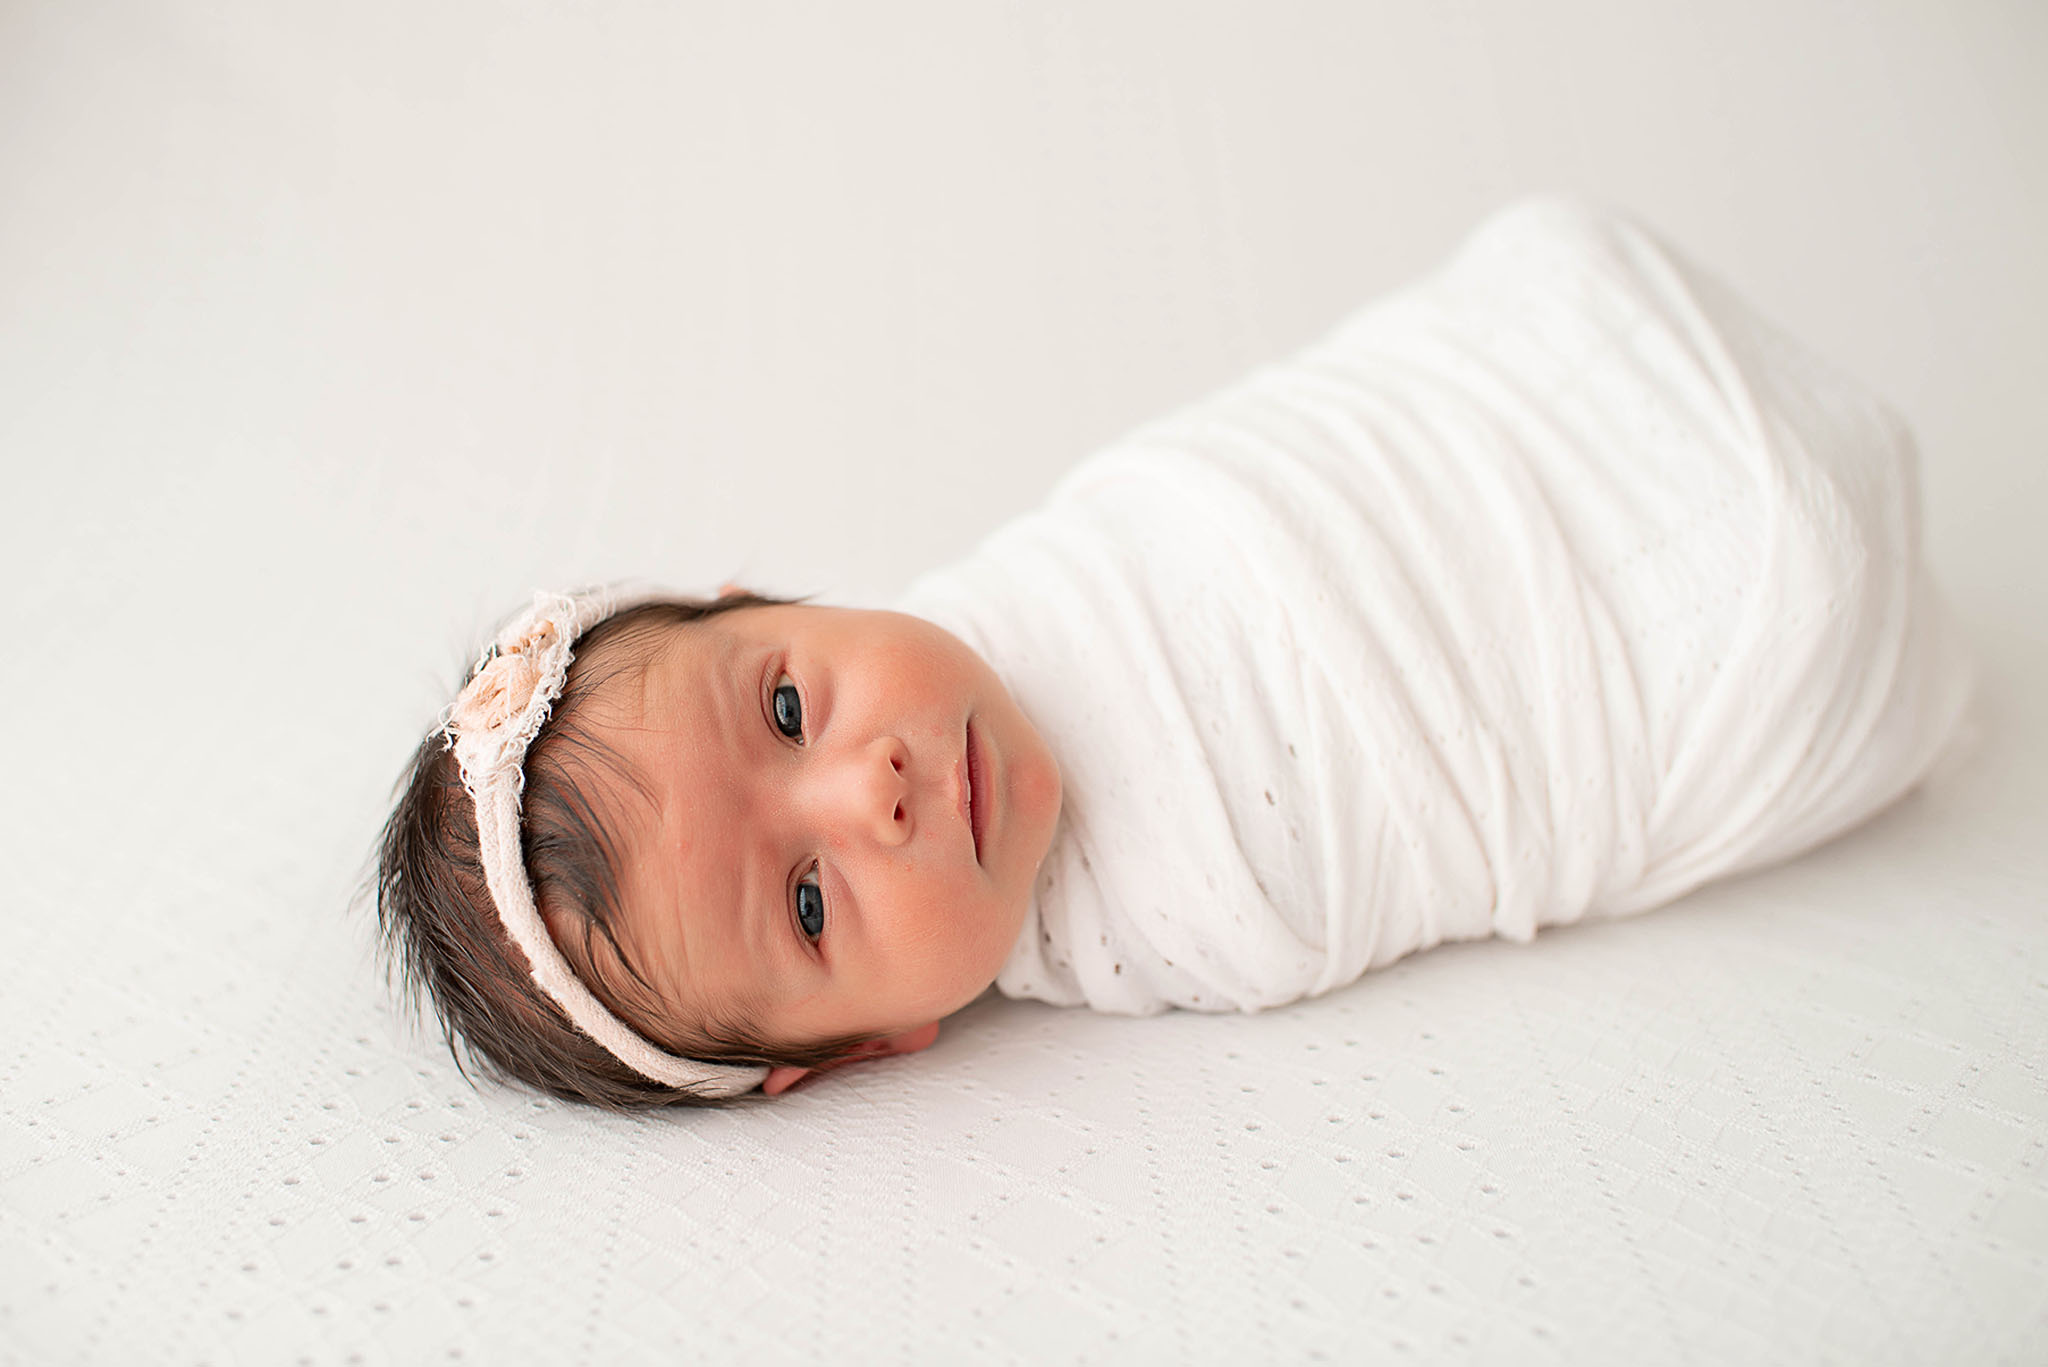 A newborn baby lays wrapped in a white swaddle and headband jacksonville doulas